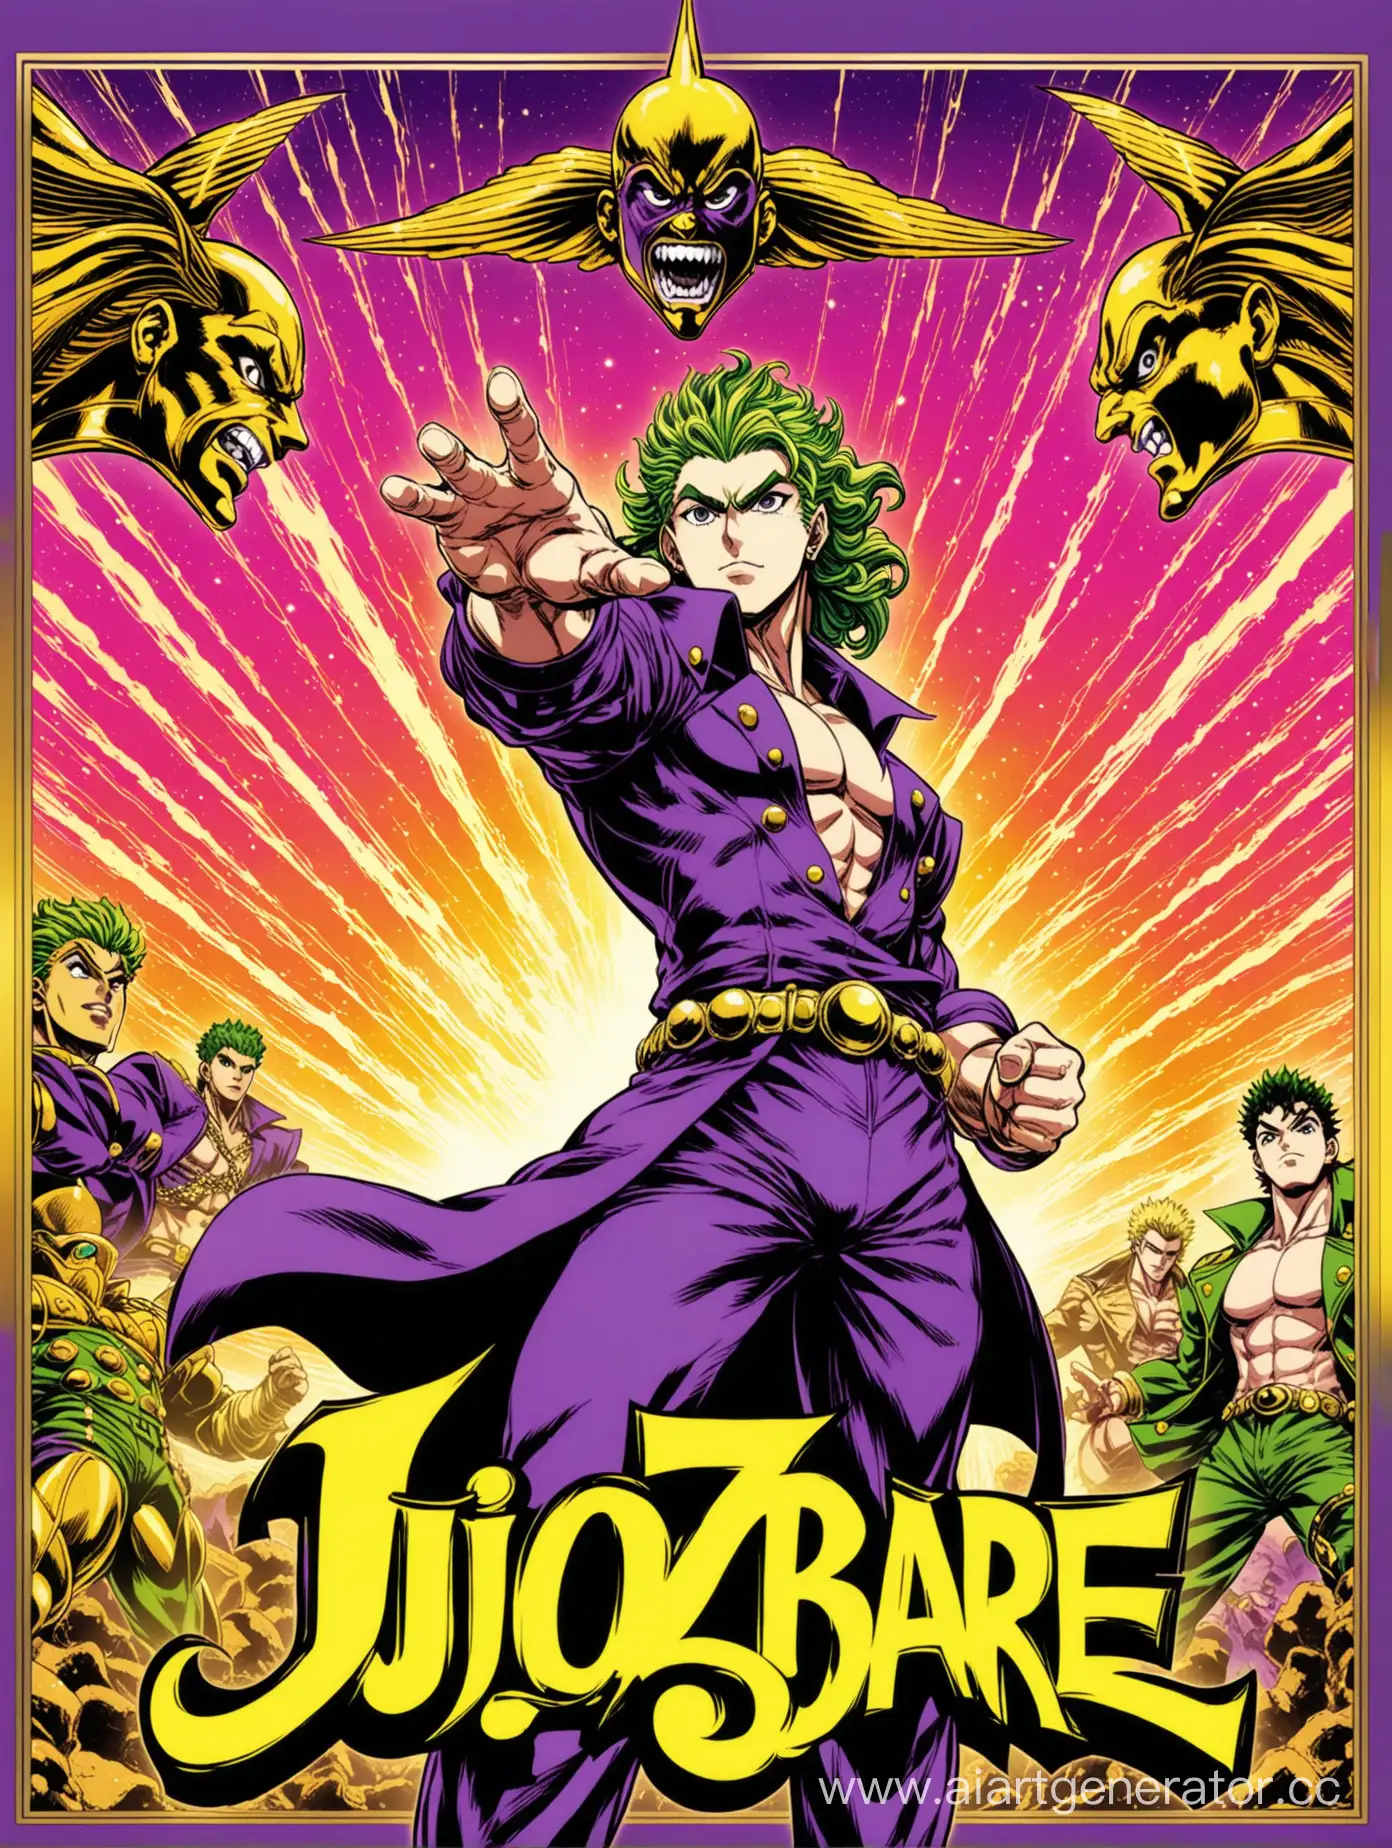 the cover for poster about "JOJO Bizarre adventures" with Dio Brando on it